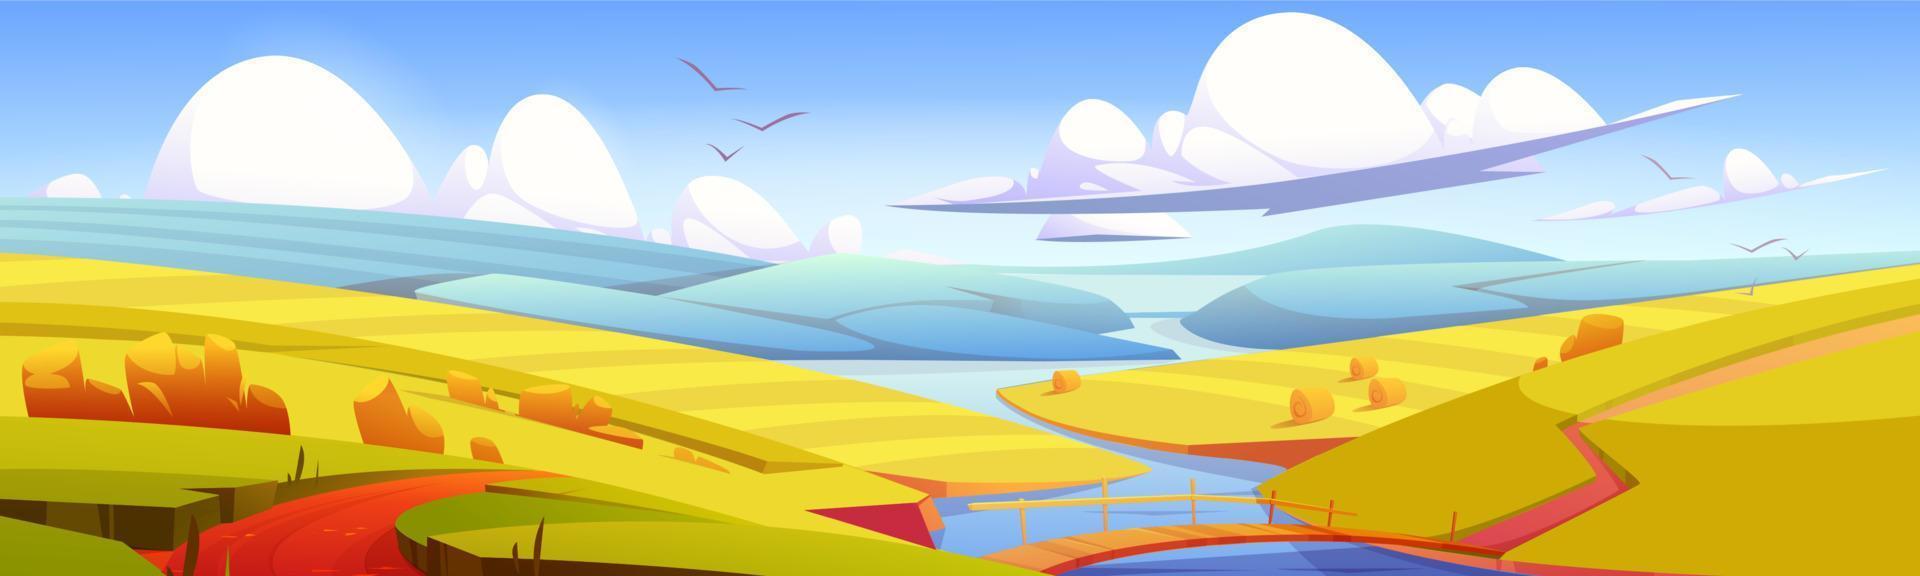 Autumn landscape with river and hay bales on field vector